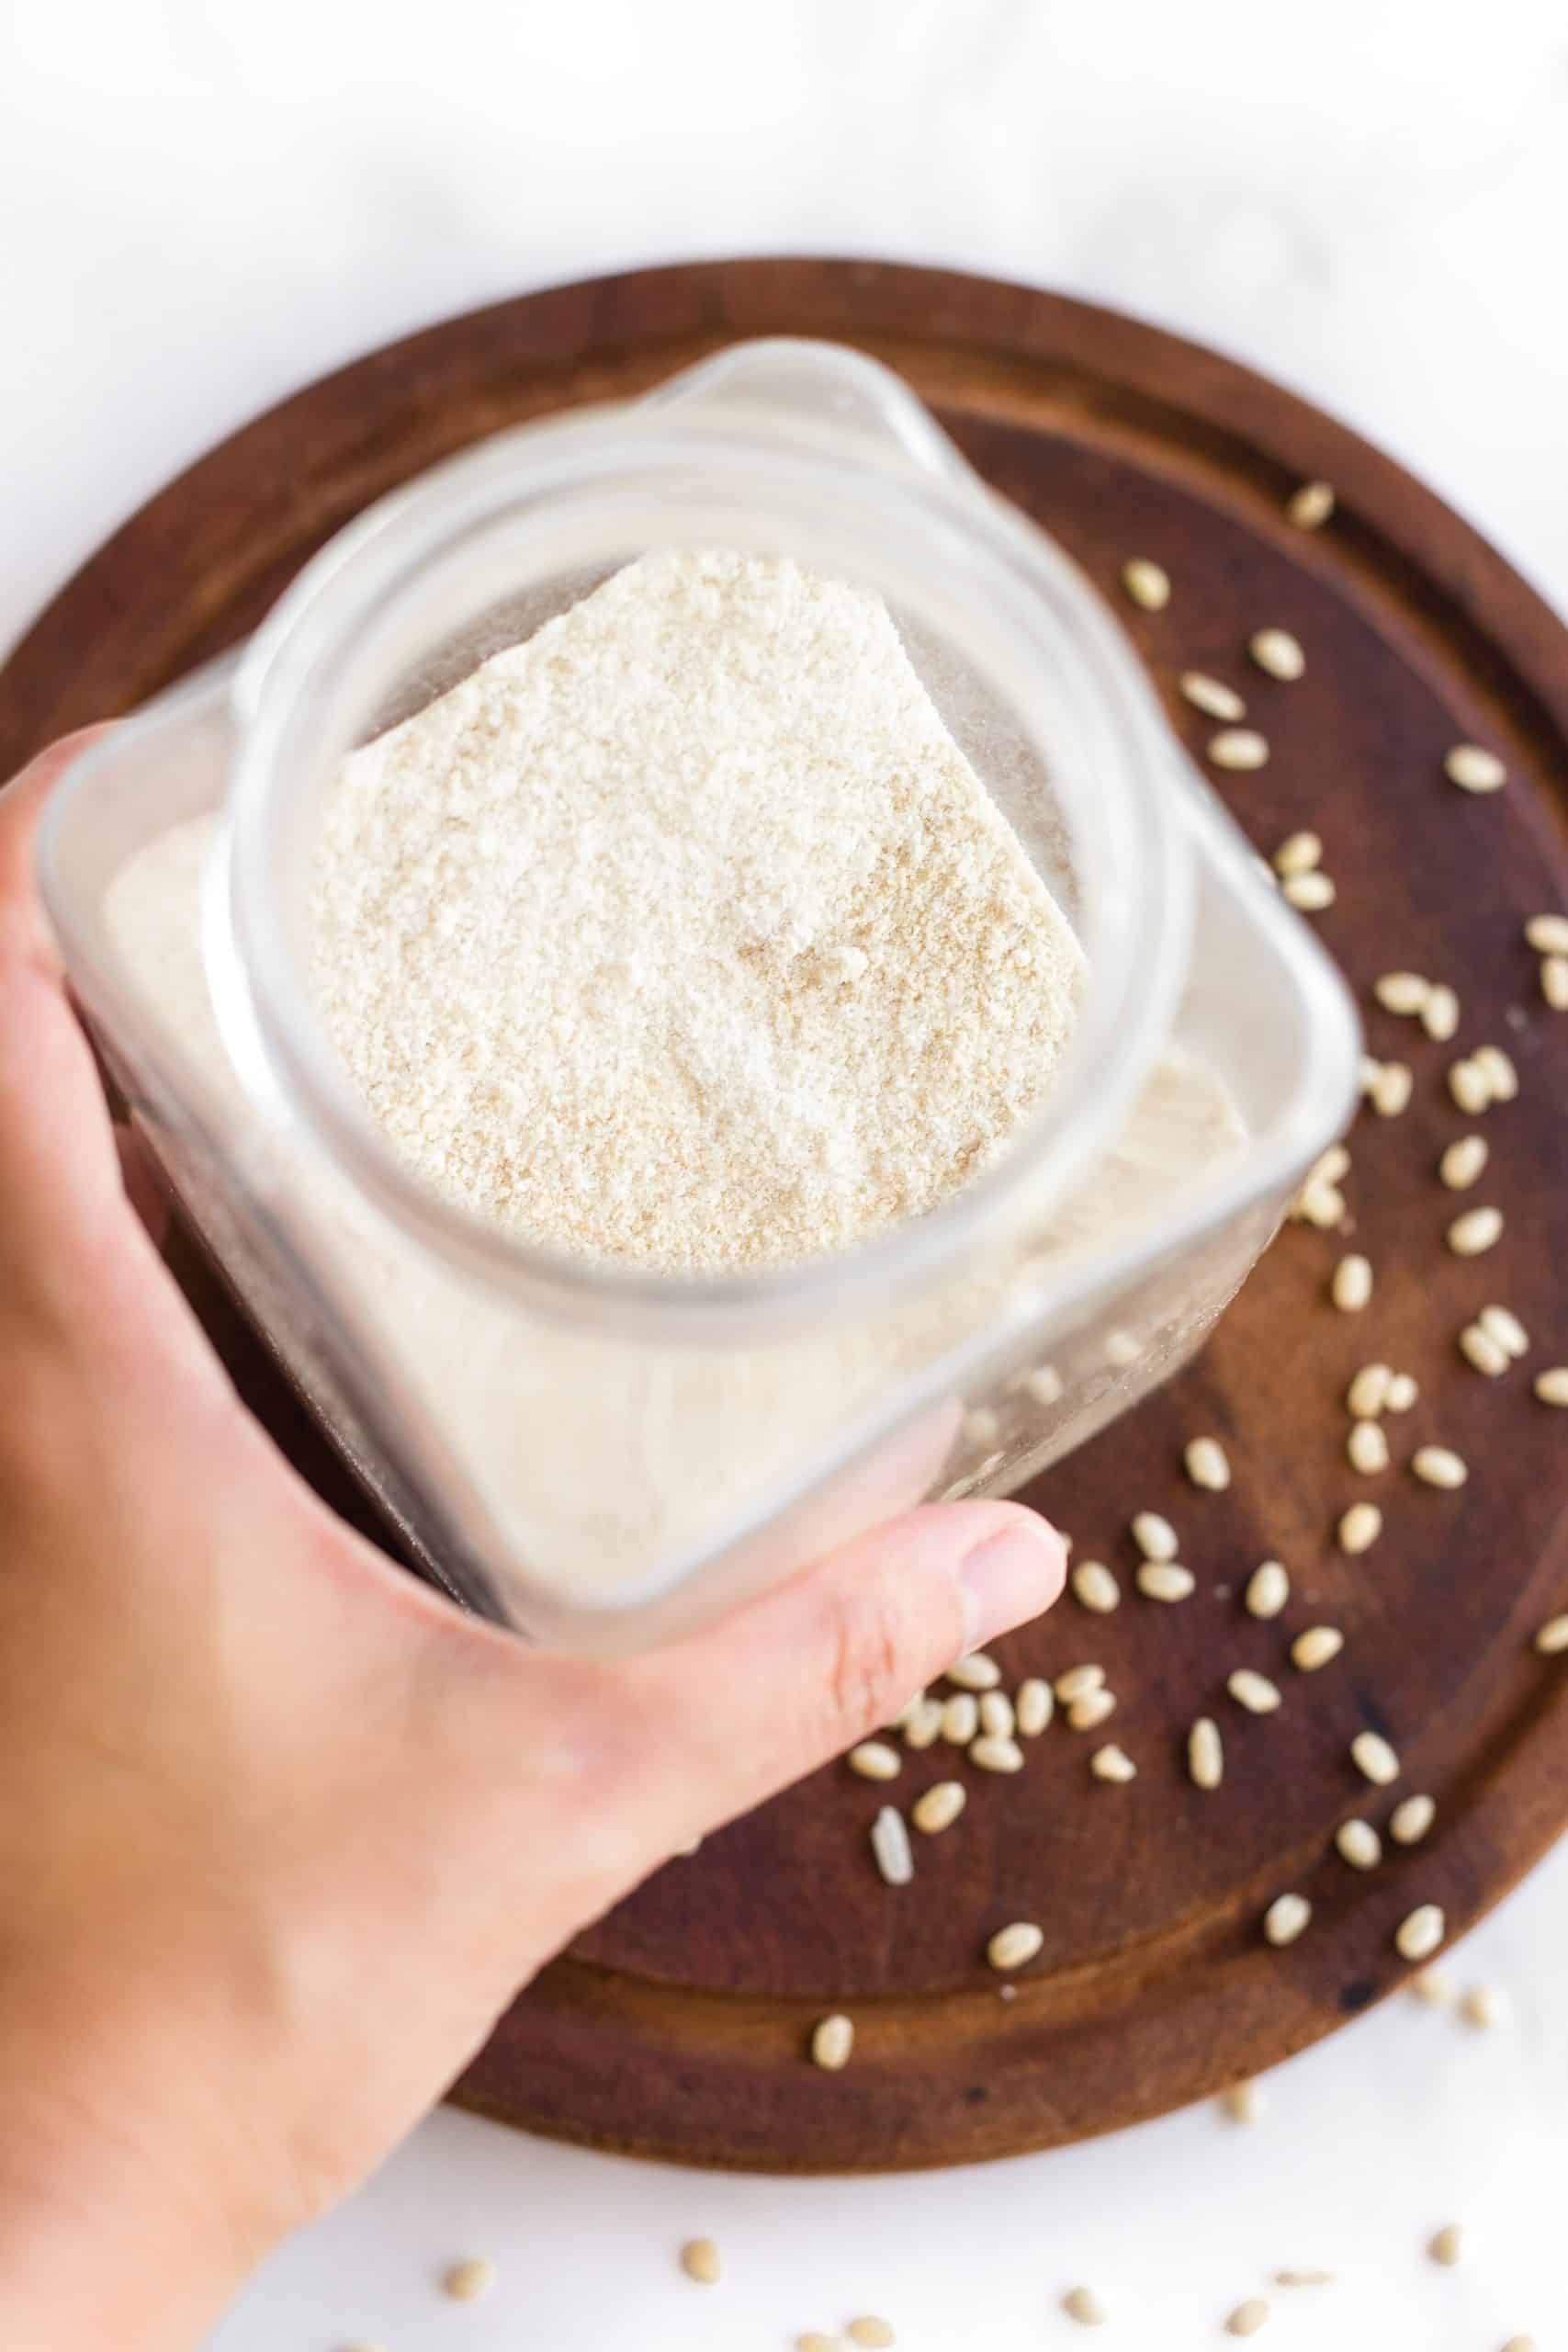 How to make brown rice flour